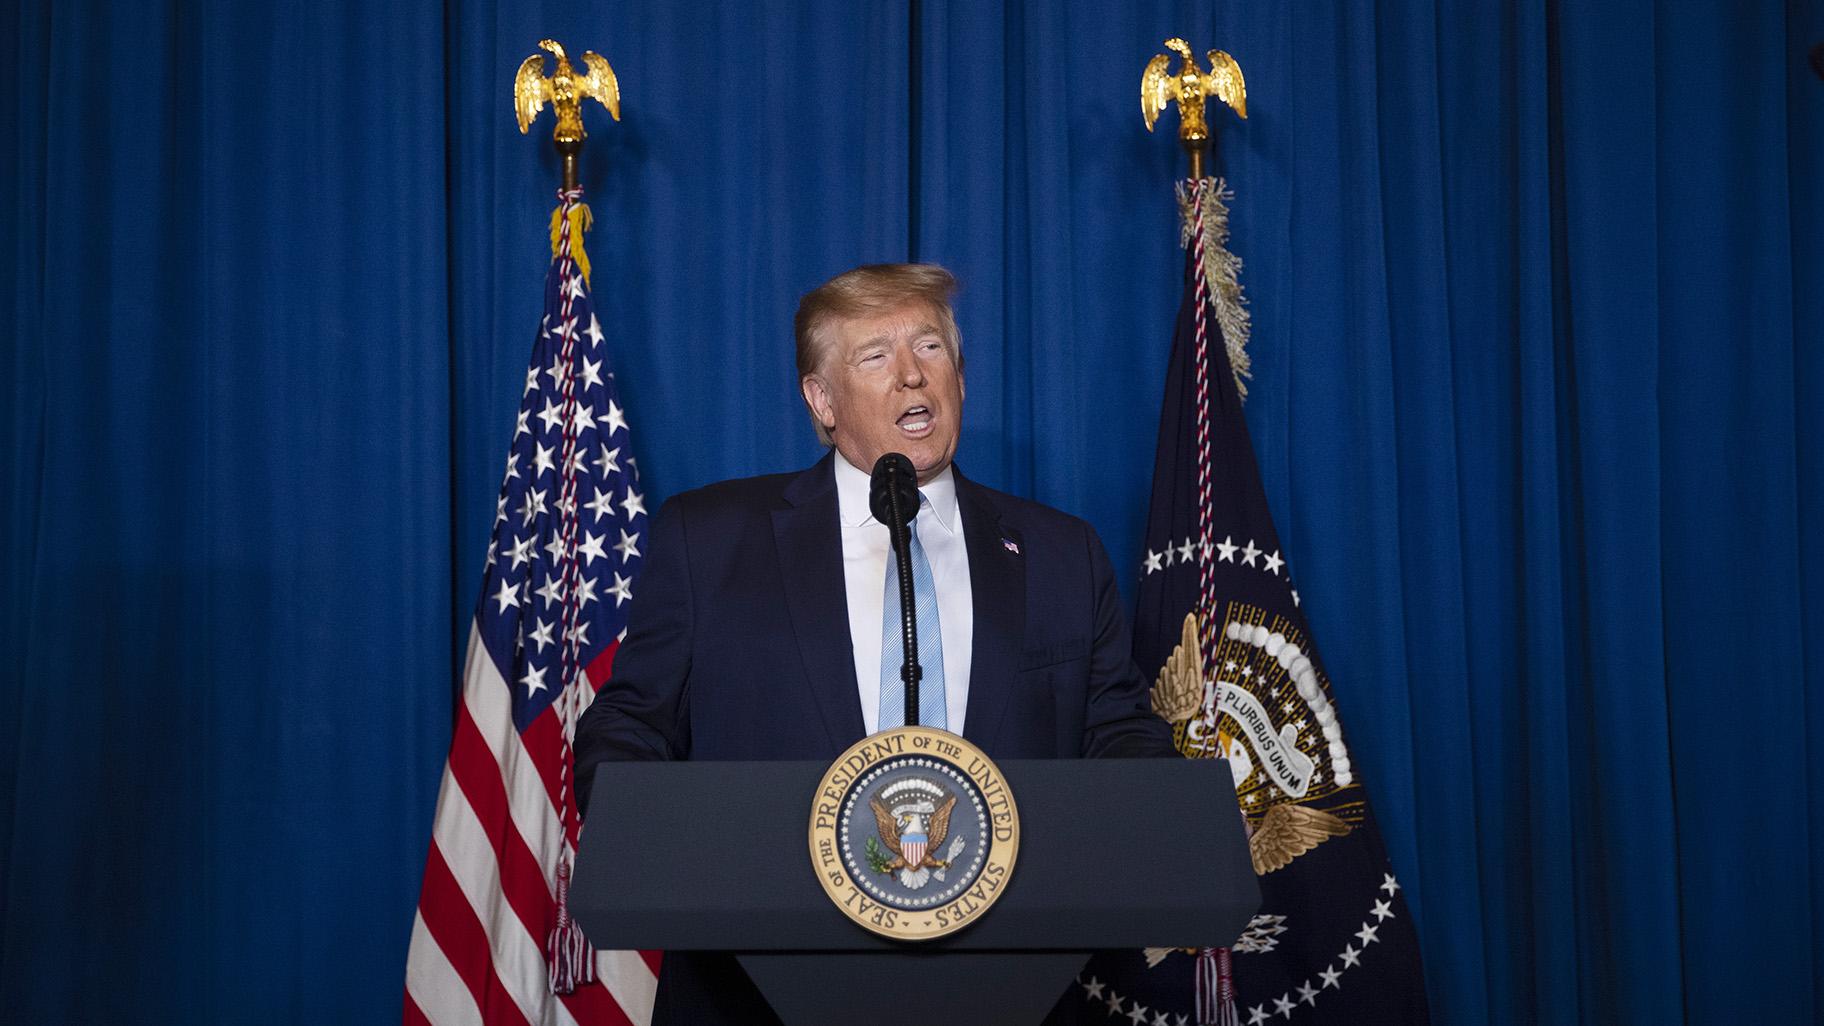 President Donald Trump delivers remarks on Iran, at his Mar-a-Lago property, Friday, Jan. 3, 2020, in Palm Beach, Fla. (AP Photo / Evan Vucci)